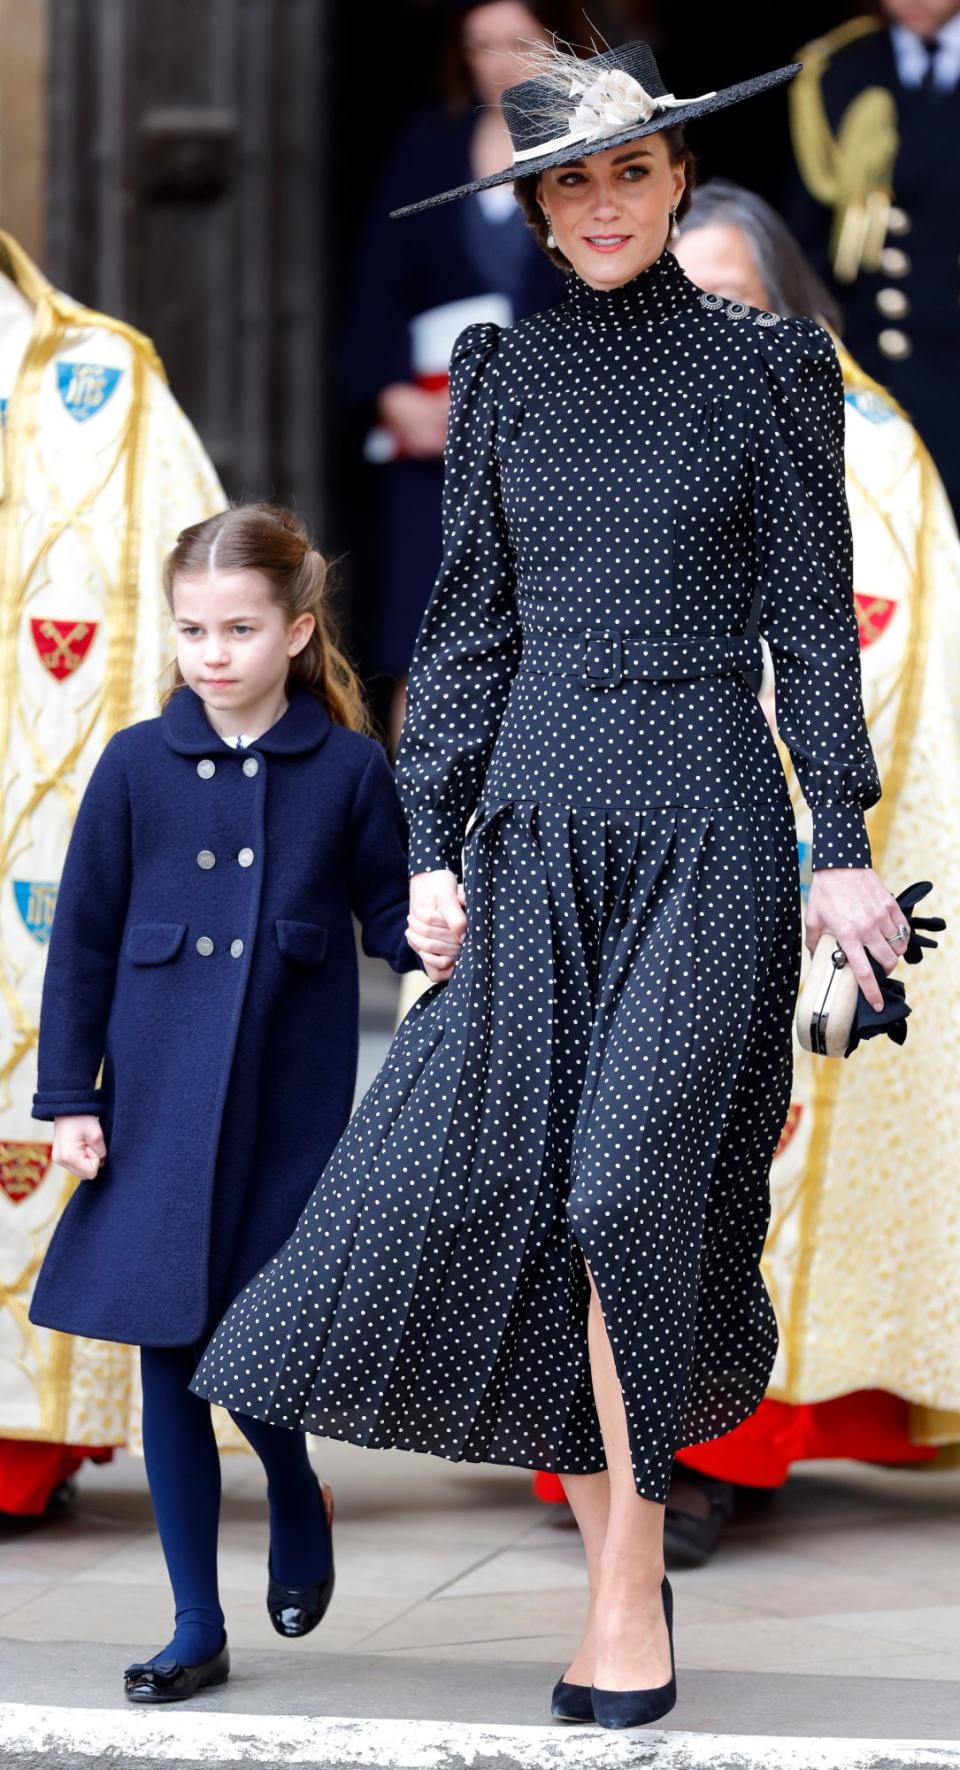 <p>The Princess of Wales opted for a belted black dress with white polka dots and puff sleeves at <a href="https://people.com/tag/prince-philip/" rel="nofollow noopener" target="_blank" data-ylk="slk:Prince Philip" class="link ">Prince Philip</a>'s <a href="https://people.com/royals/prince-george-princess-charlotte-join-kate-middleton-prince-william-prince-philip-memorial-service/" rel="nofollow noopener" target="_blank" data-ylk="slk:memorial service" class="link ">memorial service</a> in March, completing the look with a coordinated hat and black pumps. Princess Charlotte held her mother's hand as they walked into Westminster Abbey, respectfully dressed in navy.</p>